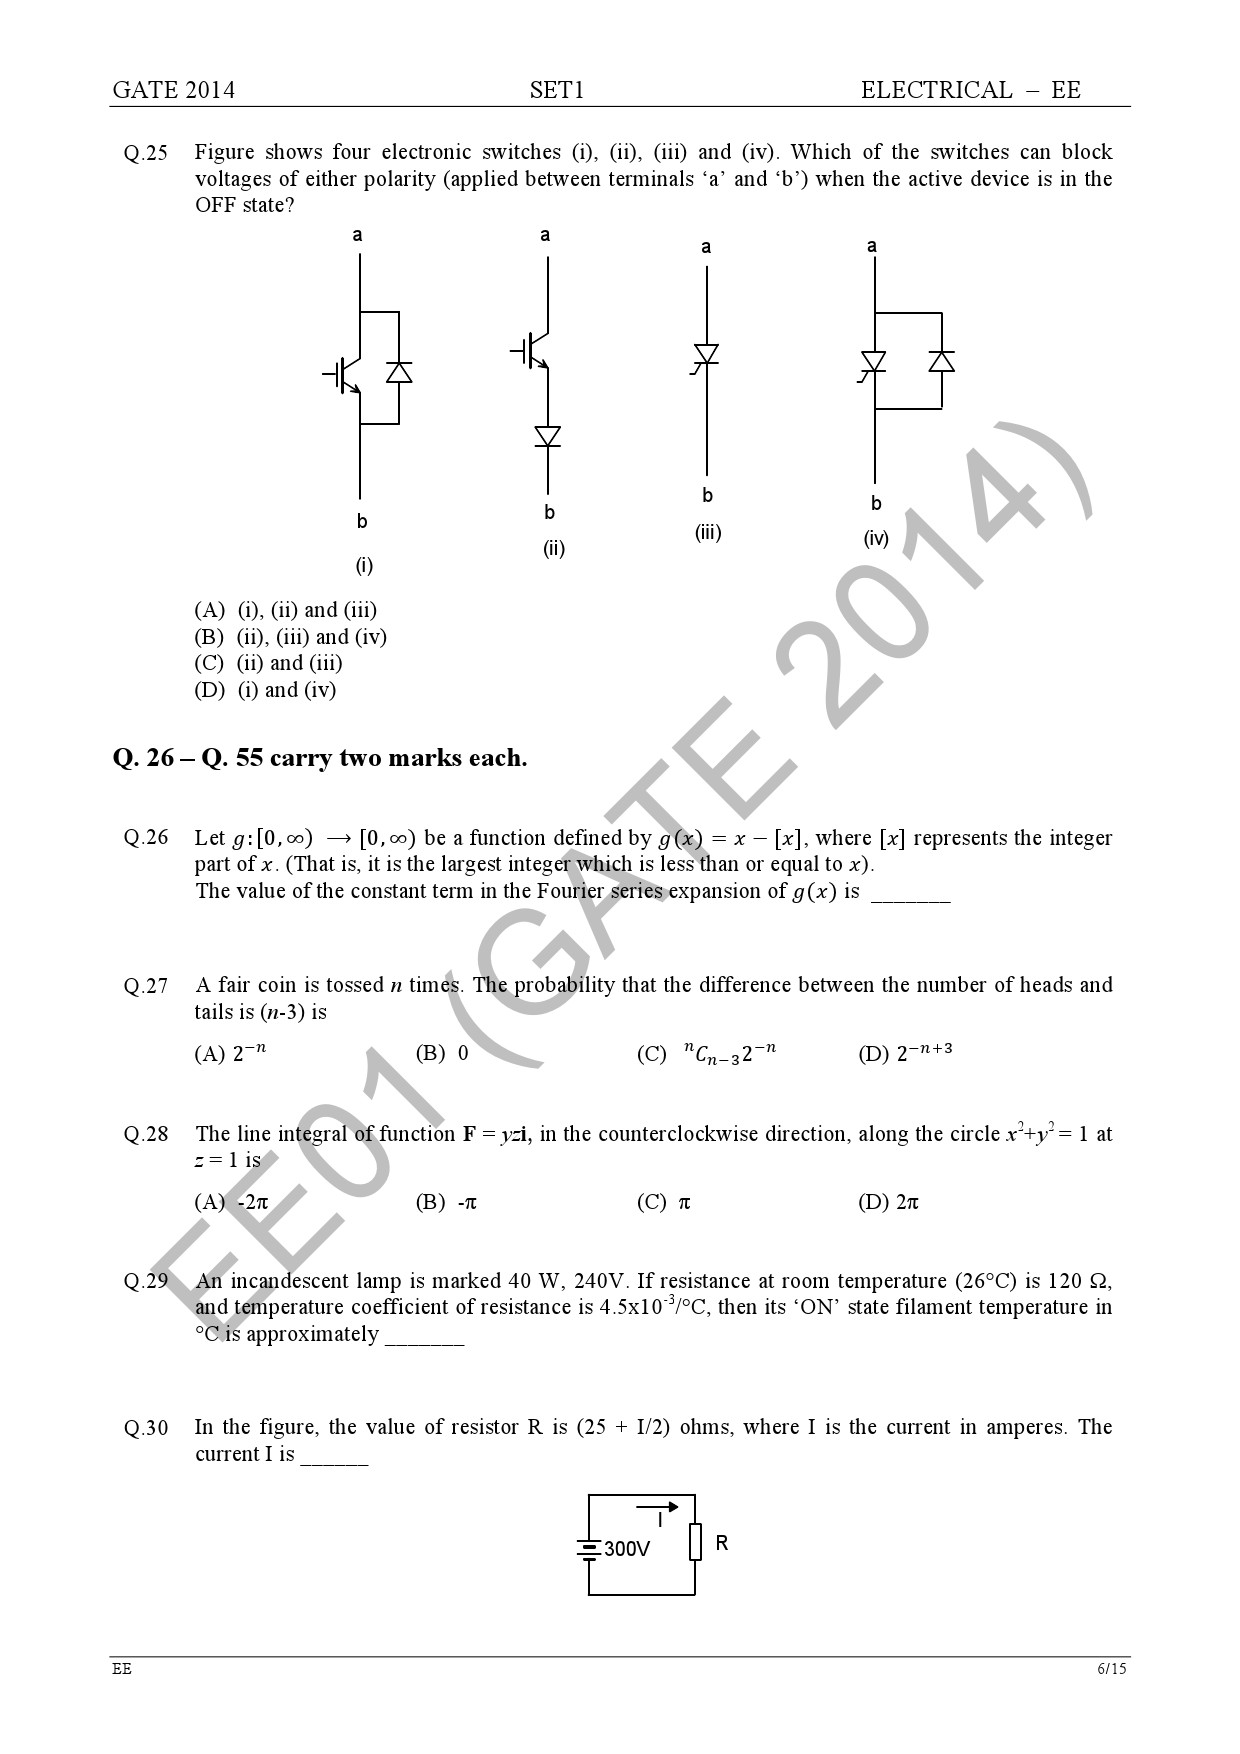 GATE Exam Question Paper 2014 Electrical Engineering Set 1 12